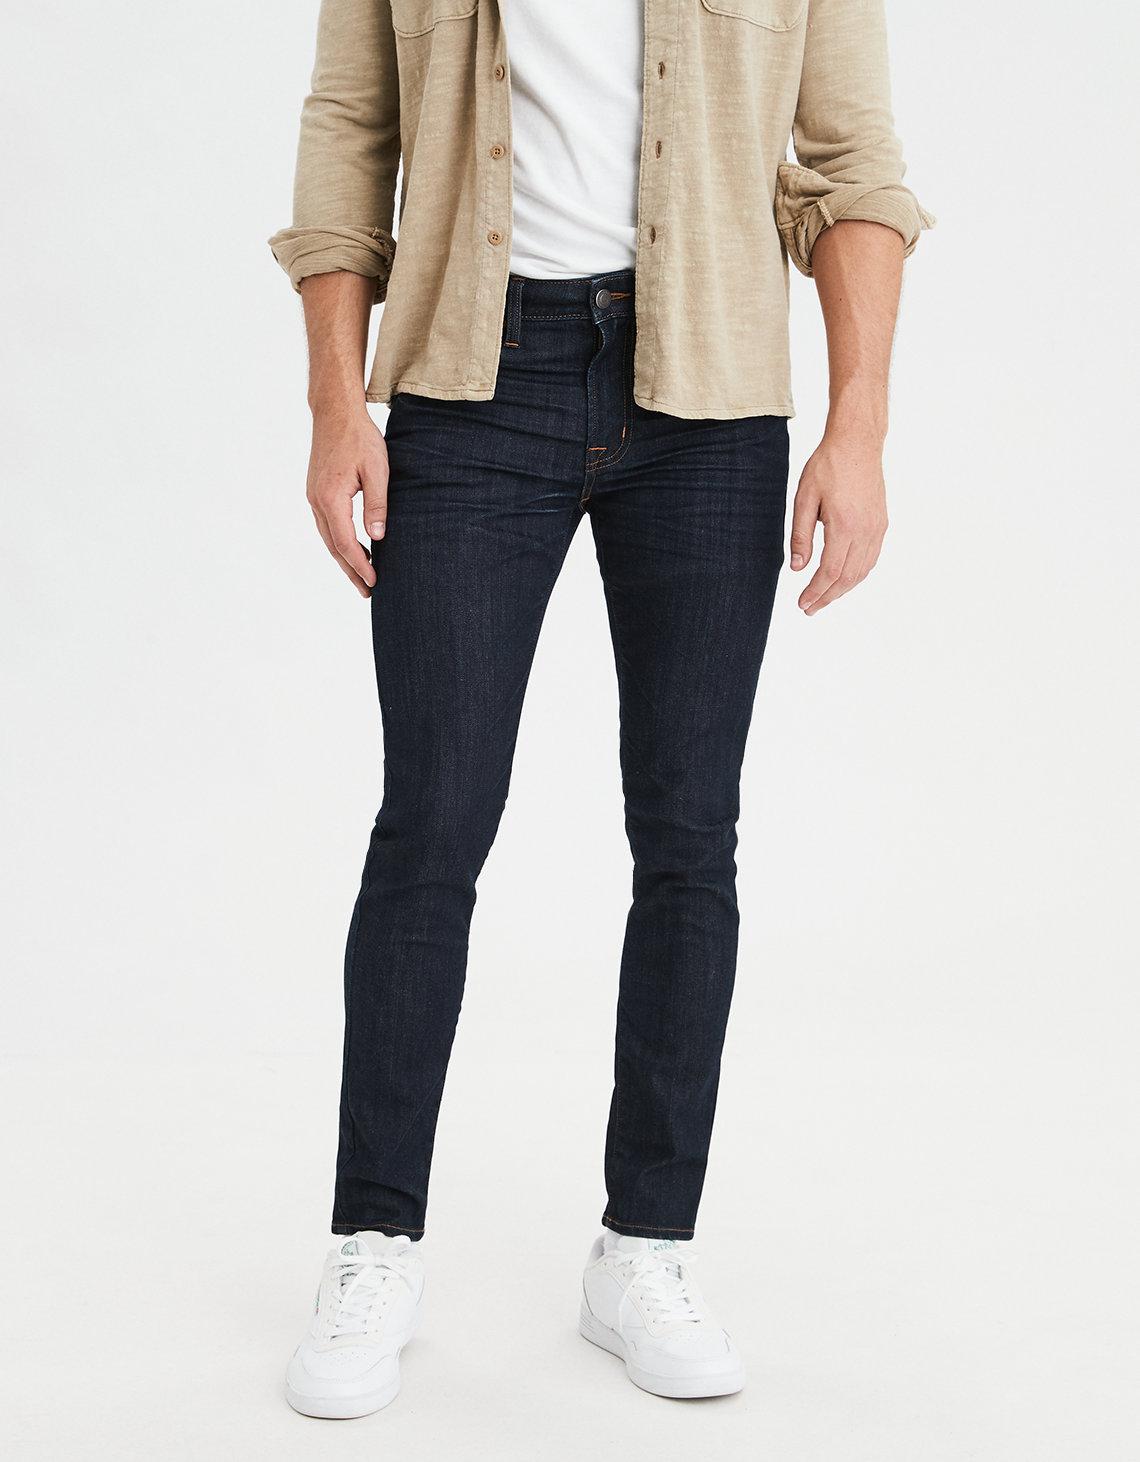 ASOS Super Skinny Jeans With Double Zip And Biker Details 